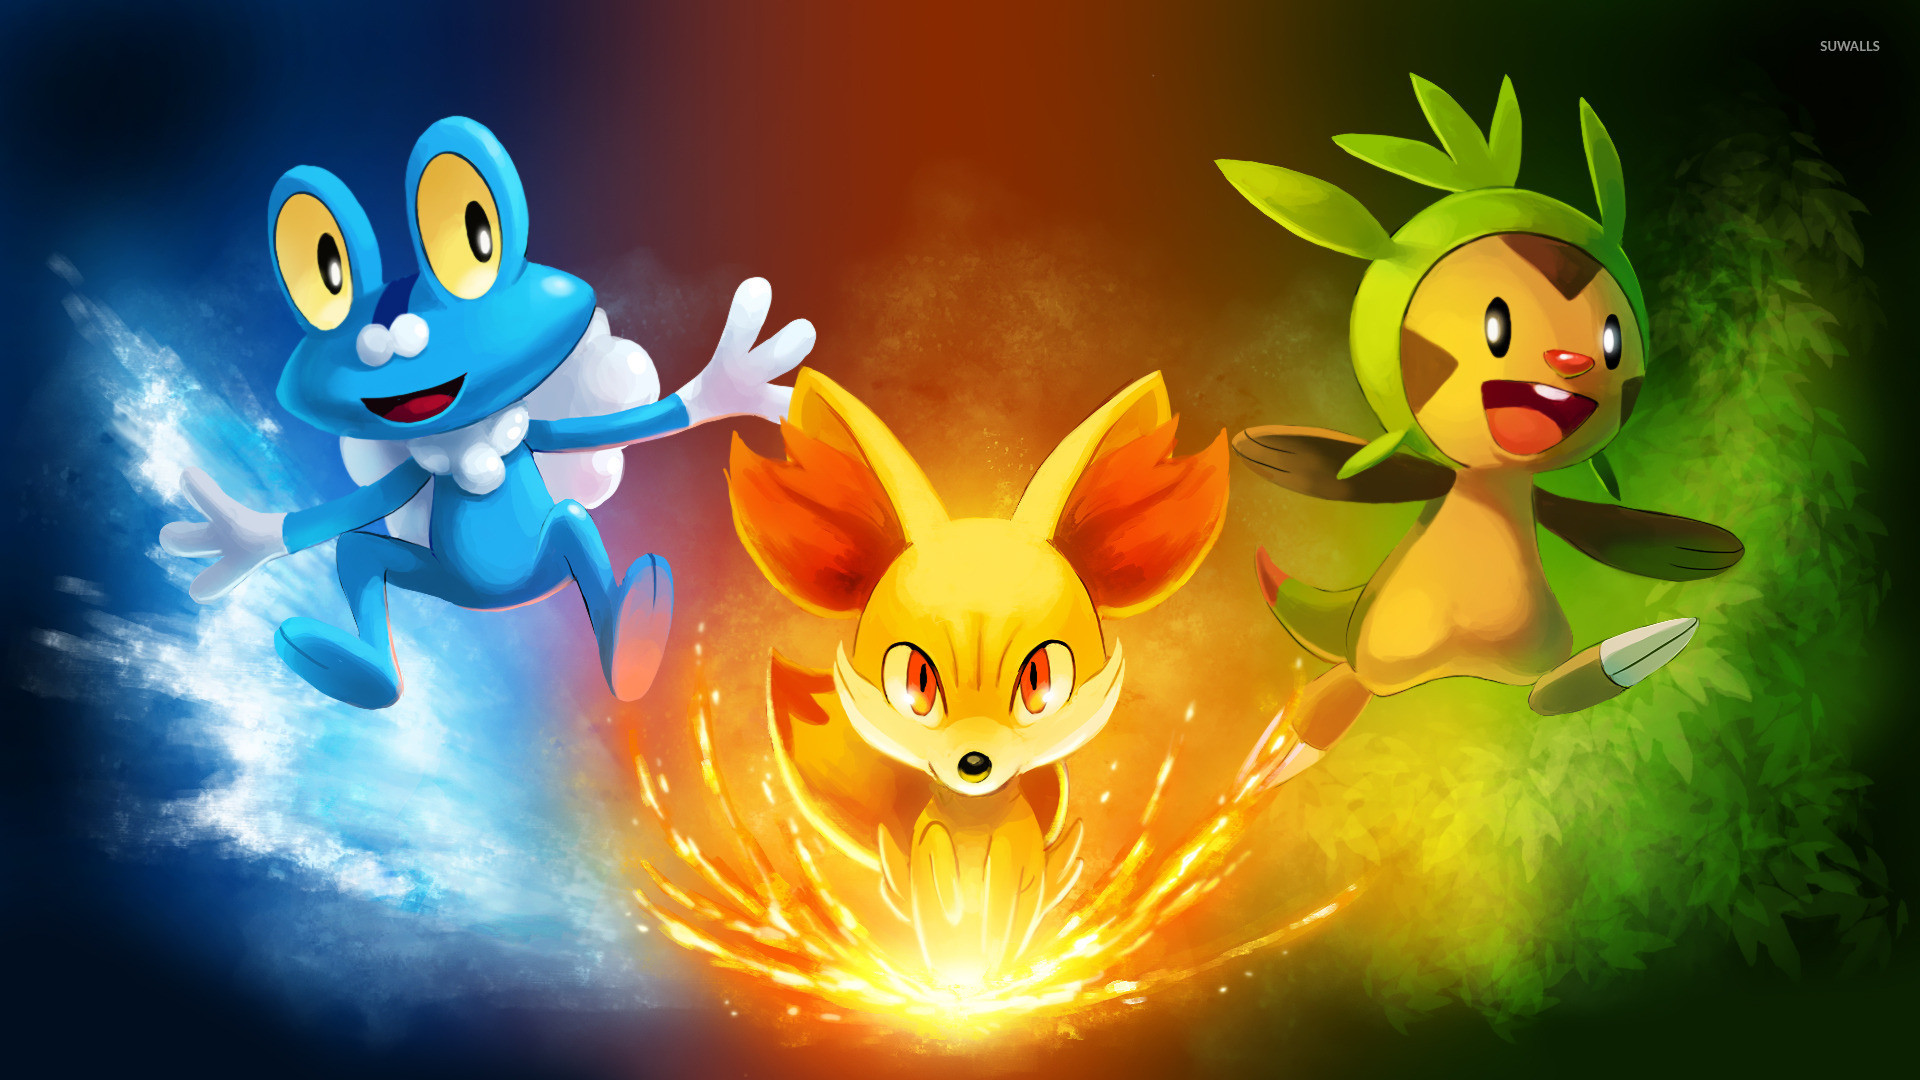 Pokemon X and Y wallpaper – Game wallpapers